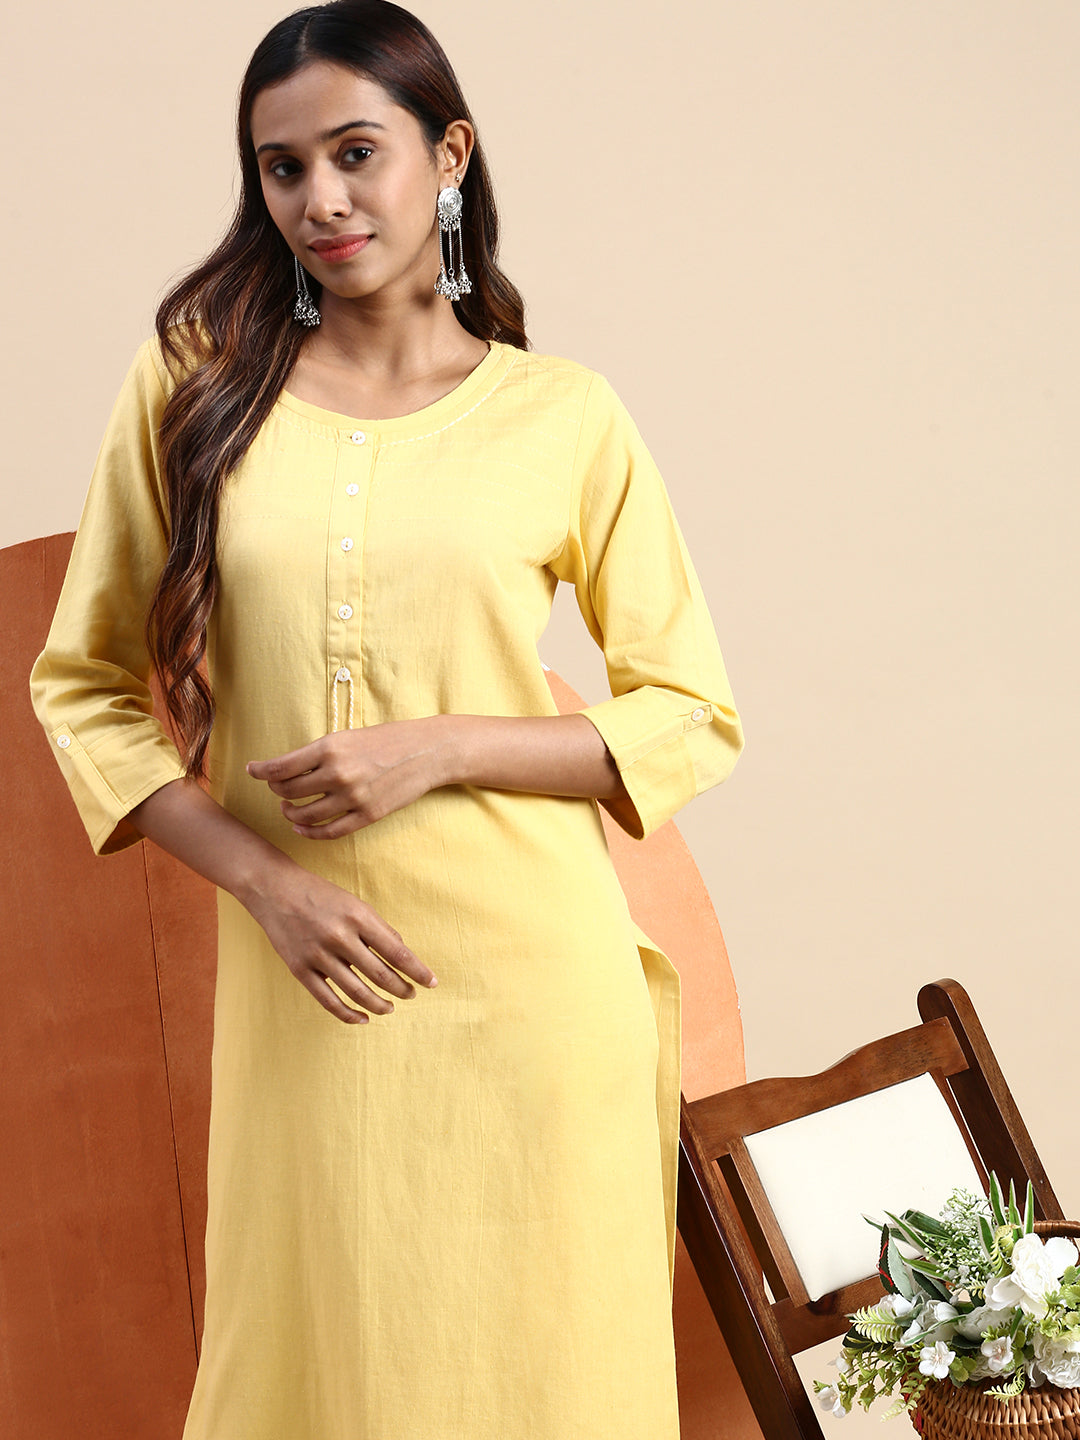 Embroidered Yellow Color Stitched Kurti In Cotton Fabric - Zakarto Yellow  Kurti, Yellow Kurtis, Yellow Kurtis… | Maxi dress, Everyday dresses, Cotton  kurti designs